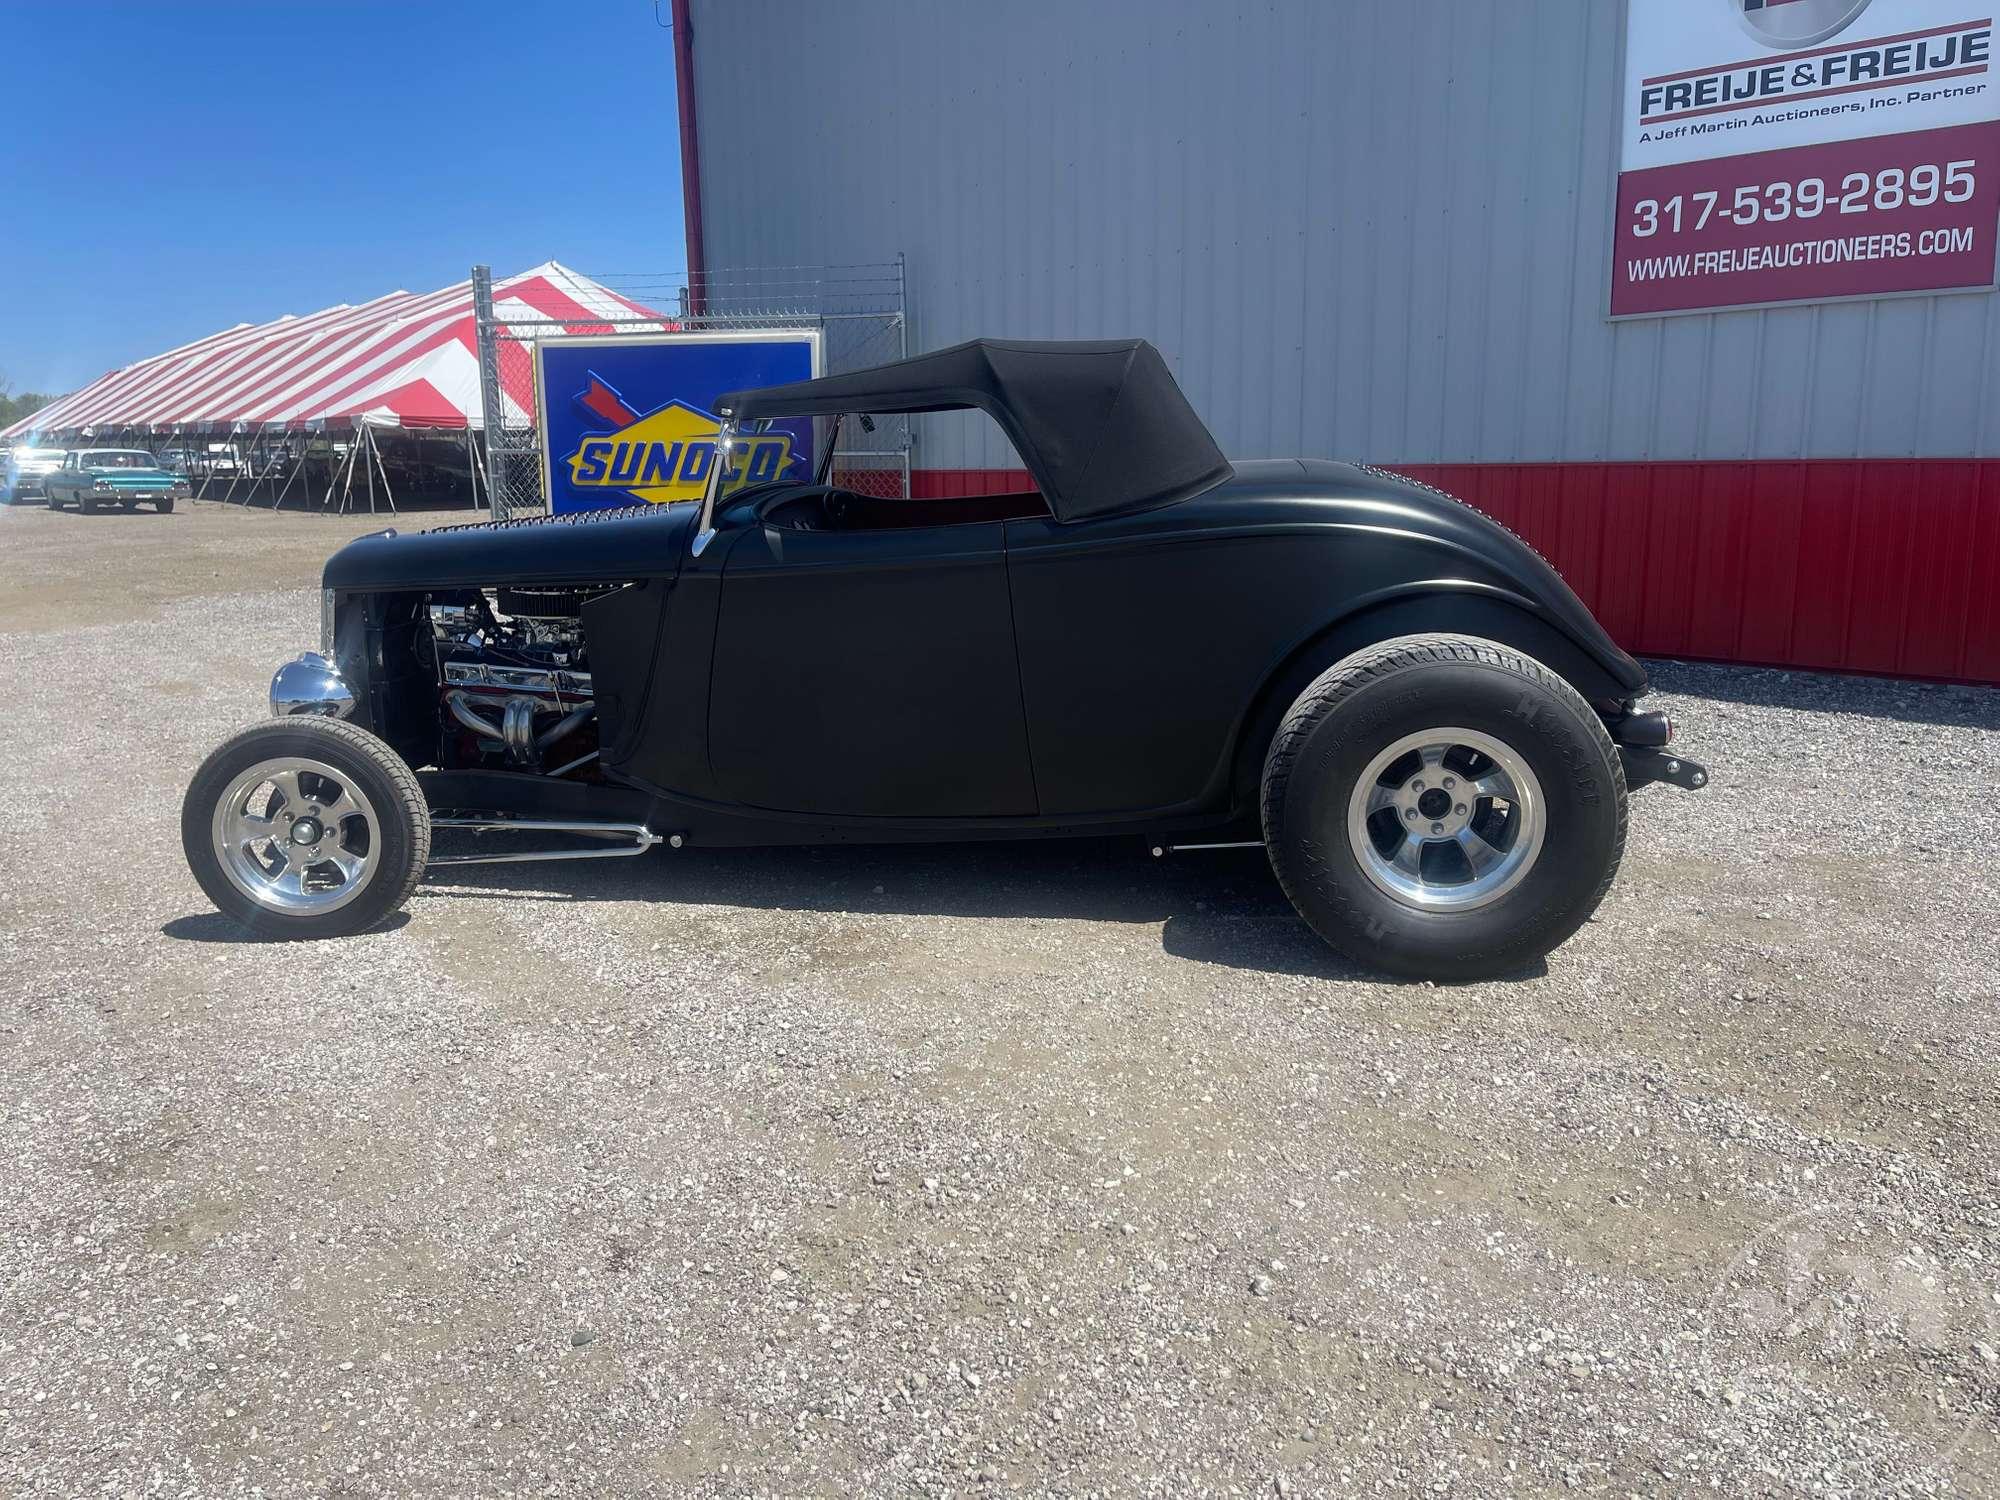 1933 FORD ROADSTER VIN: 18136409 COUPE